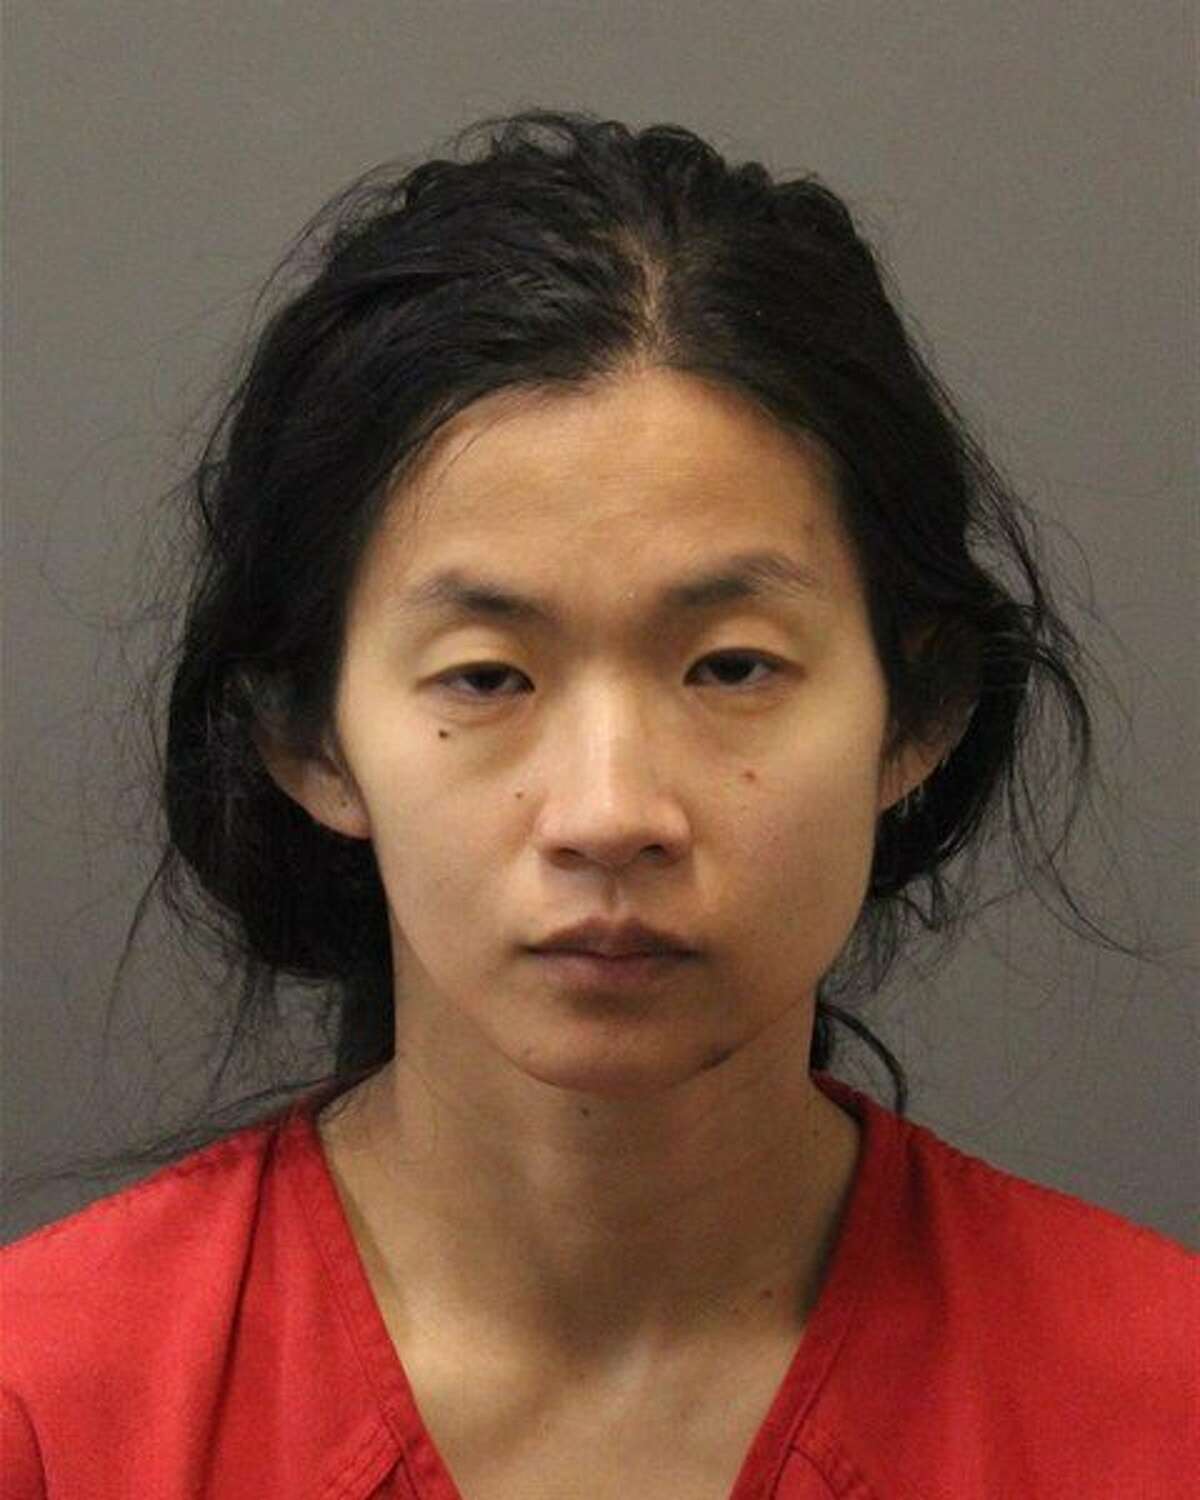 Stephanie Ching and Doulgas Lomas have been detained in Loudoun Adult Detention Center in Leesburg, Va., since they were booked around 1 a.m. May 23.